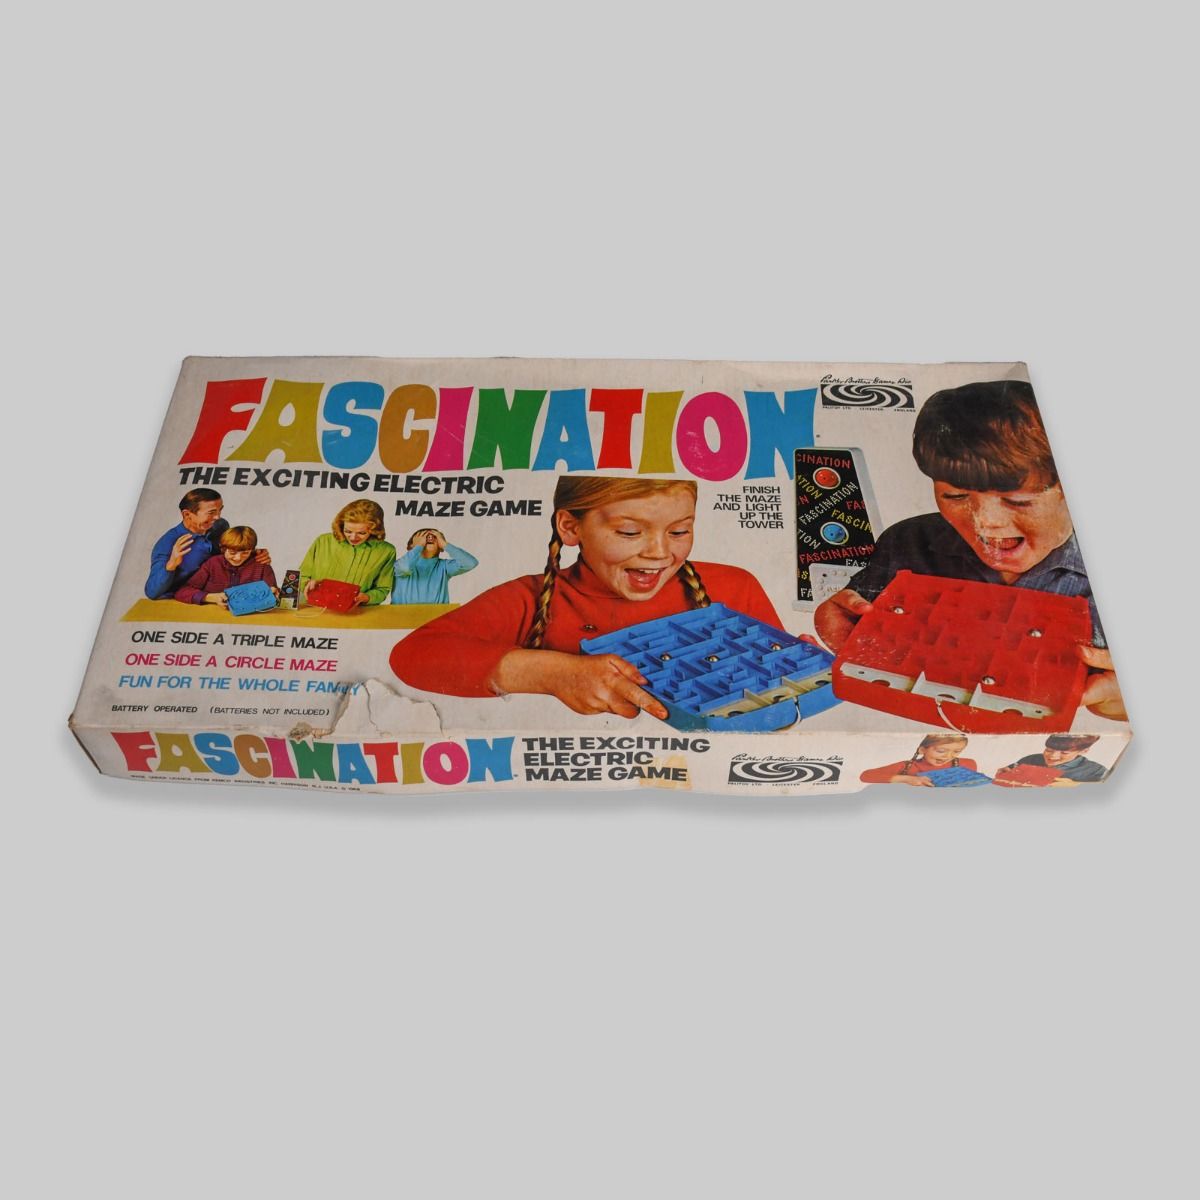 'Fascination - The Exciting Electric Maze Game' 1968 Board Game